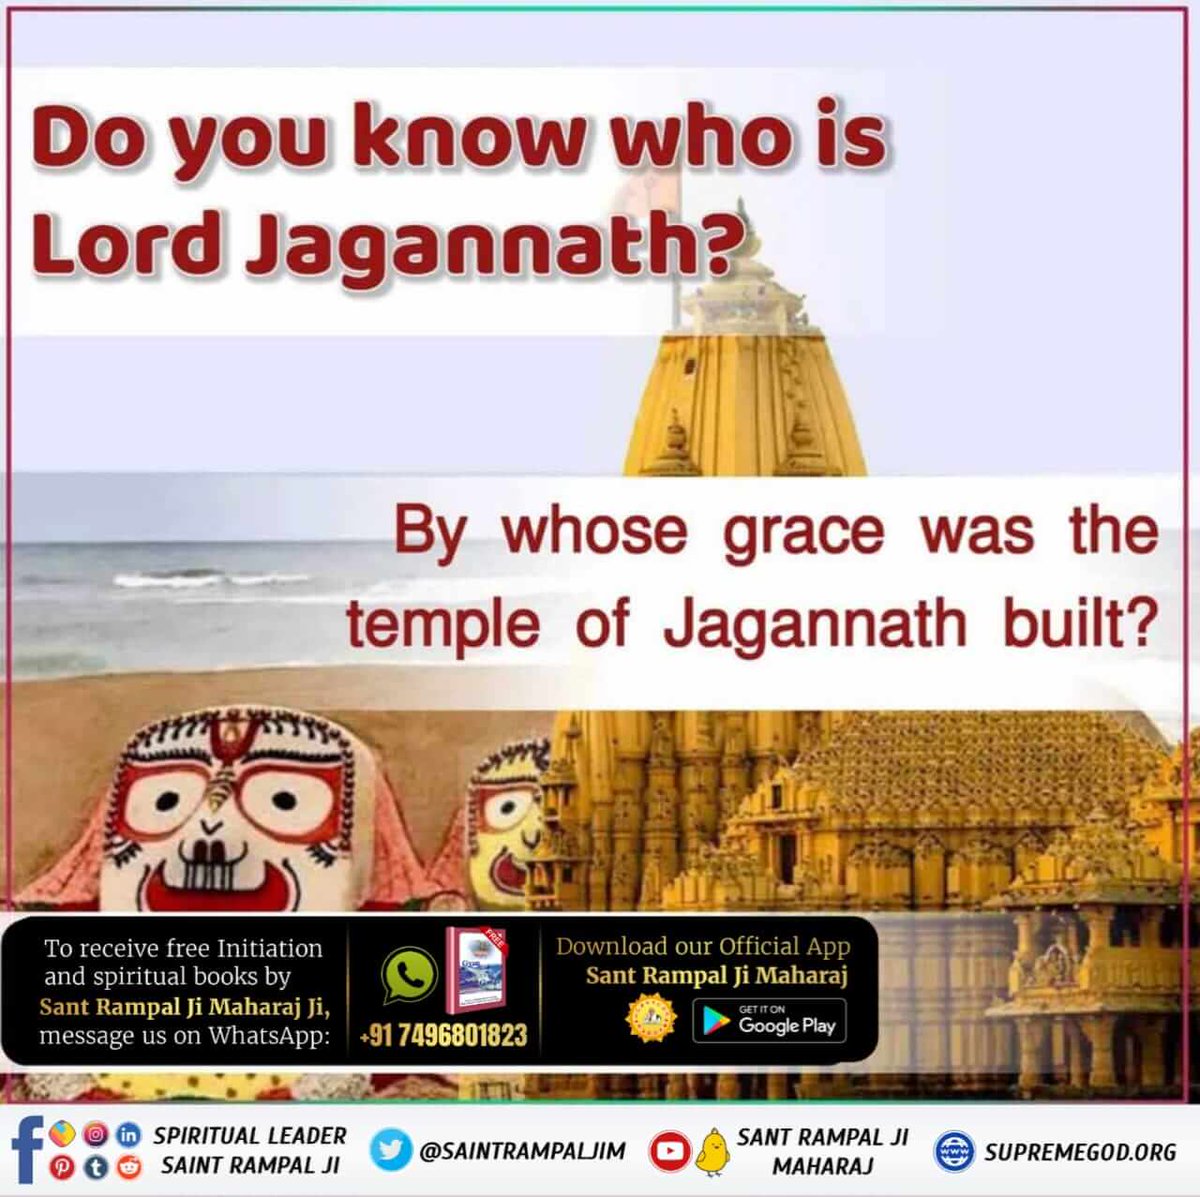 Conspiracies against Sant Shri Asharamji Bapu and other Hindu Saints are #ConspiraciesAgainstHinduism by missionaries and anti-Hindu forces. Their target is to wipe out Sanatan Dharma from the face of earth.
Jago Hindu ! Unite and spoil their ill intentions.
#TrueStoryOfJagannath